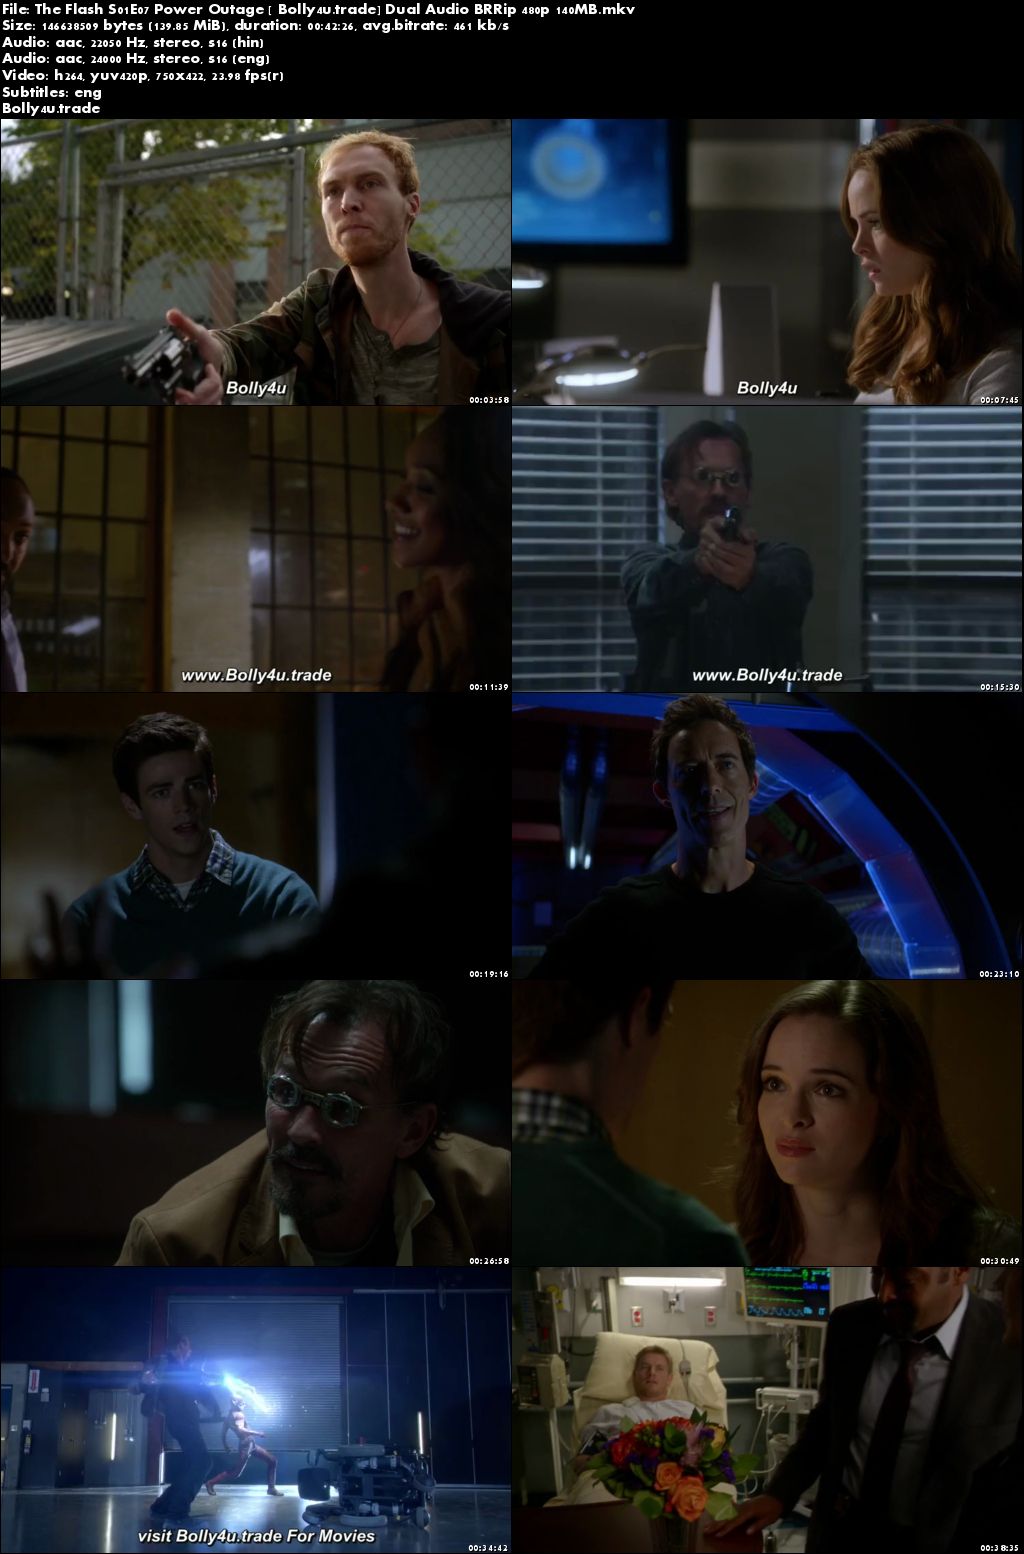 The Flash S01E07 Power Outage BRRip 140Mb Hindi Dual Audio 480p Download